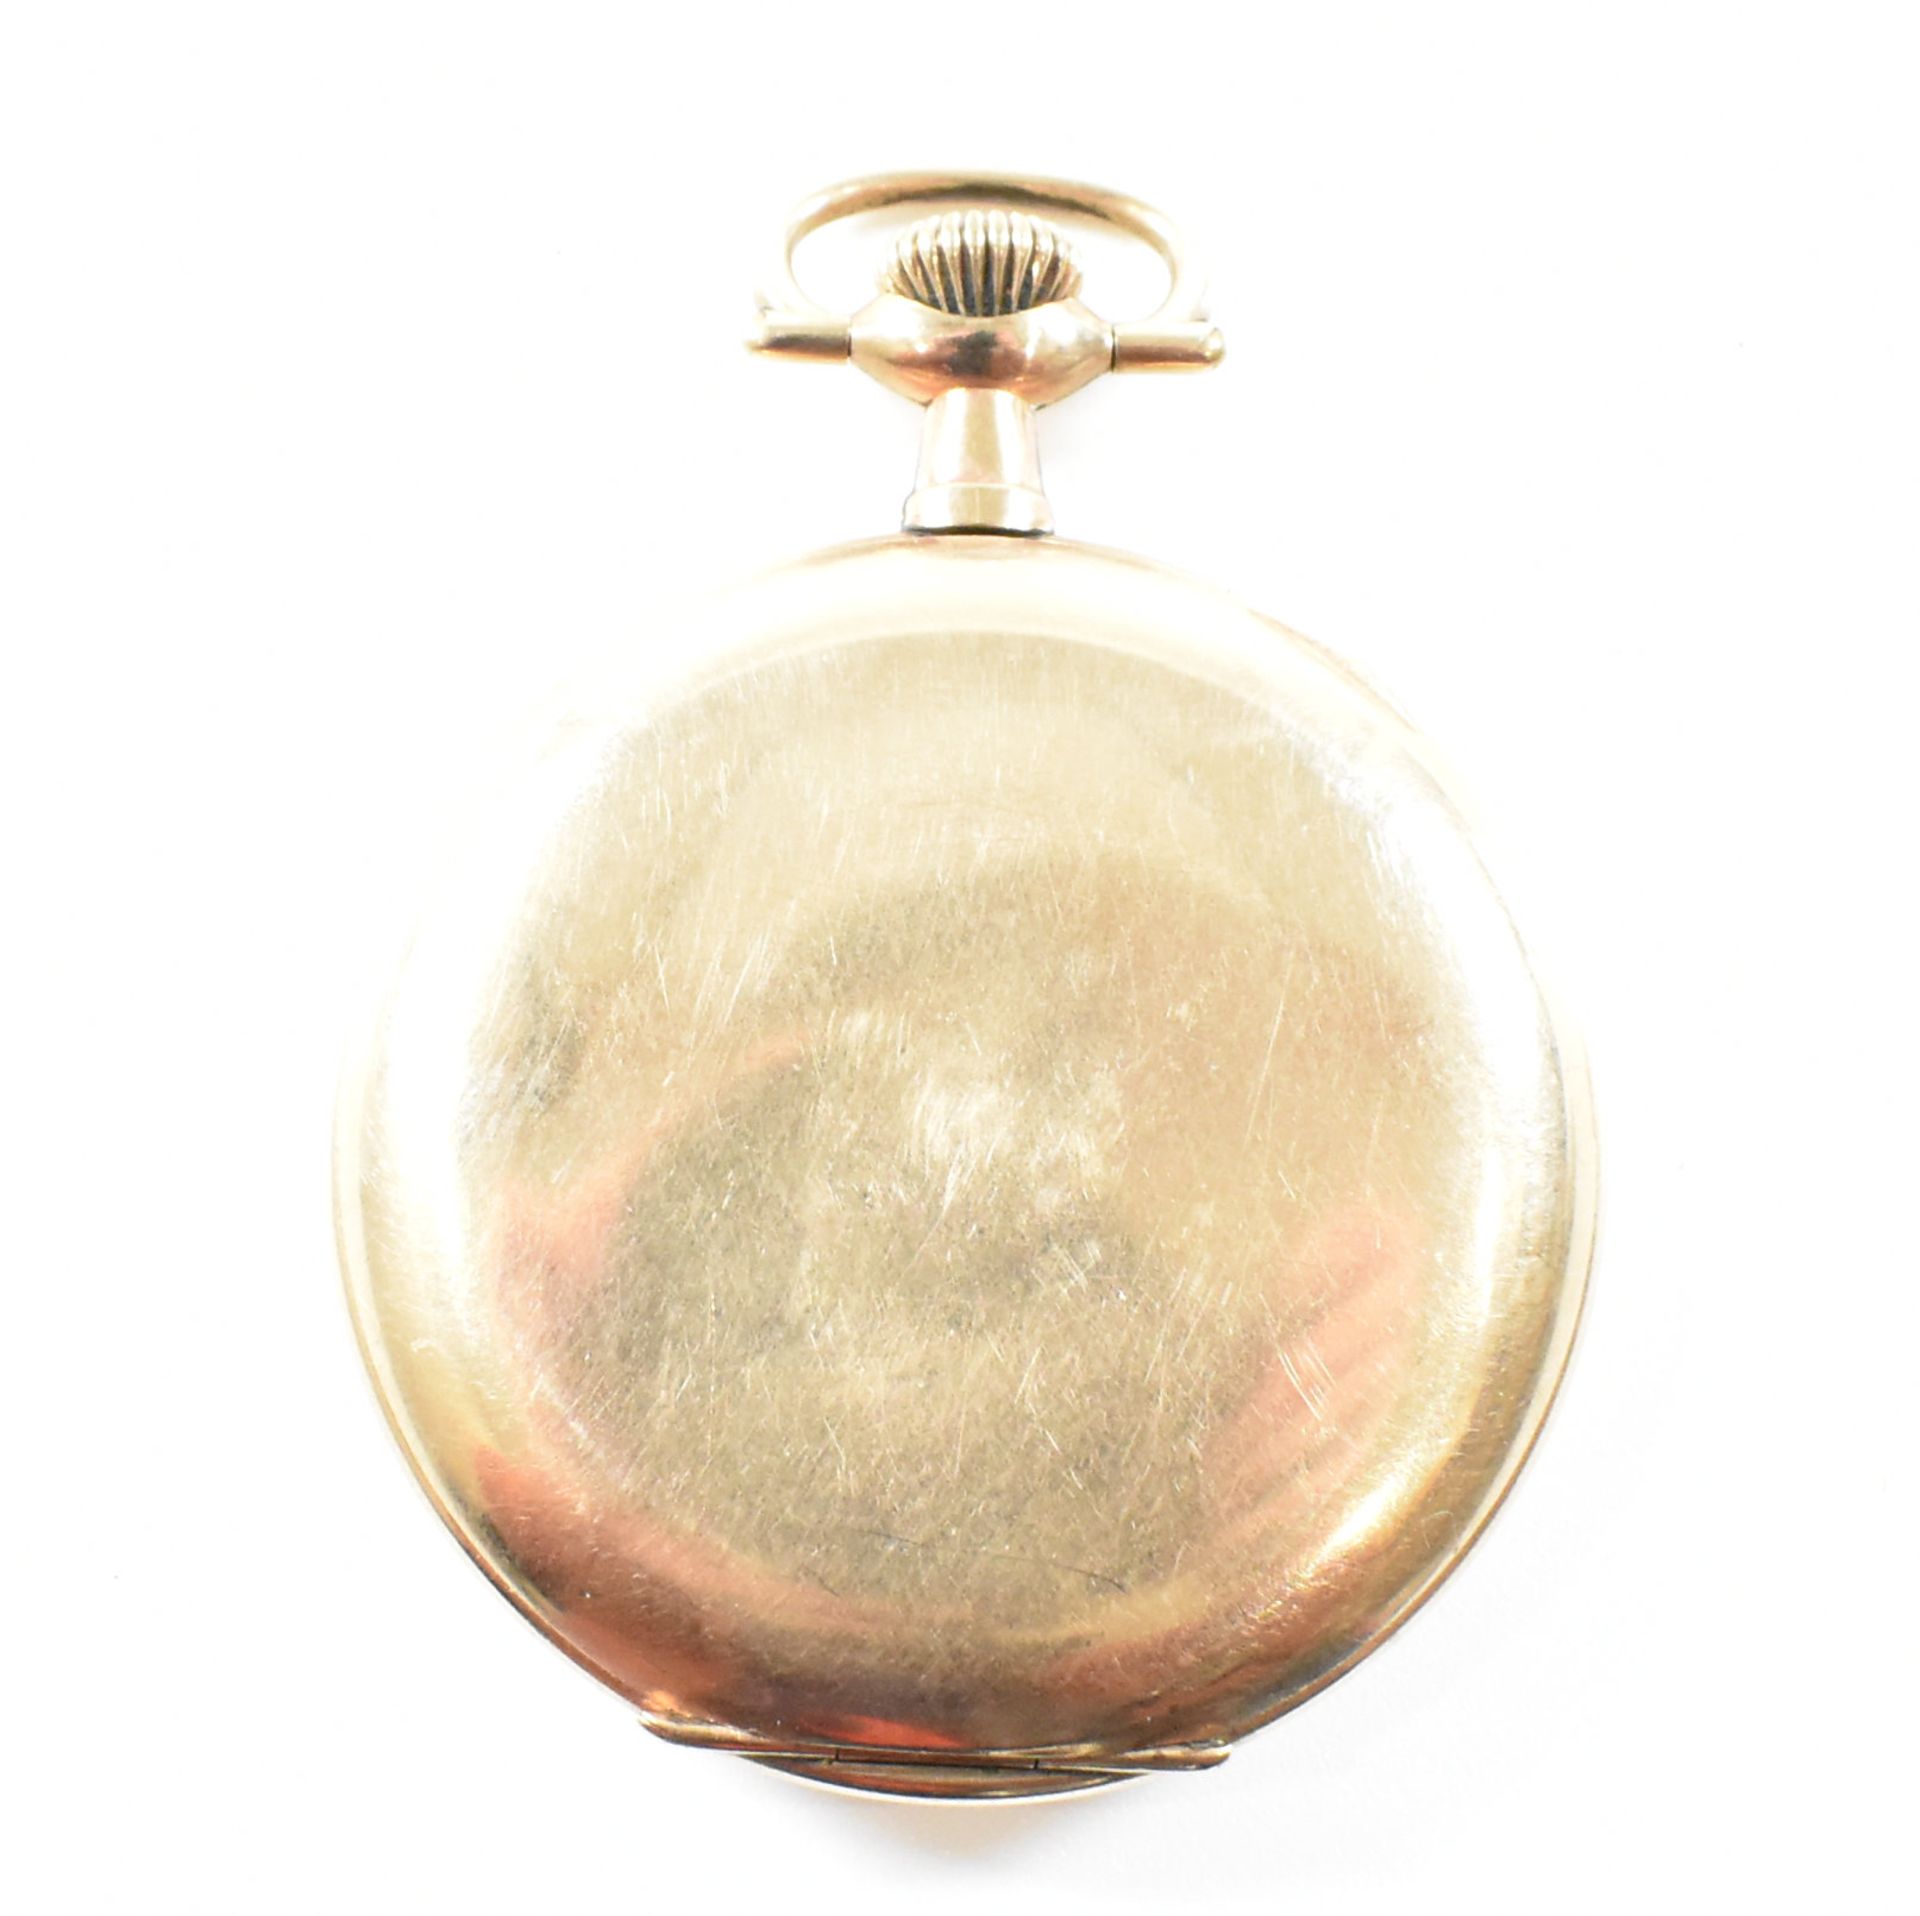 ROLEX LEVER SWISS MADE YELLOW METAL POCKET WATCH - Image 2 of 7